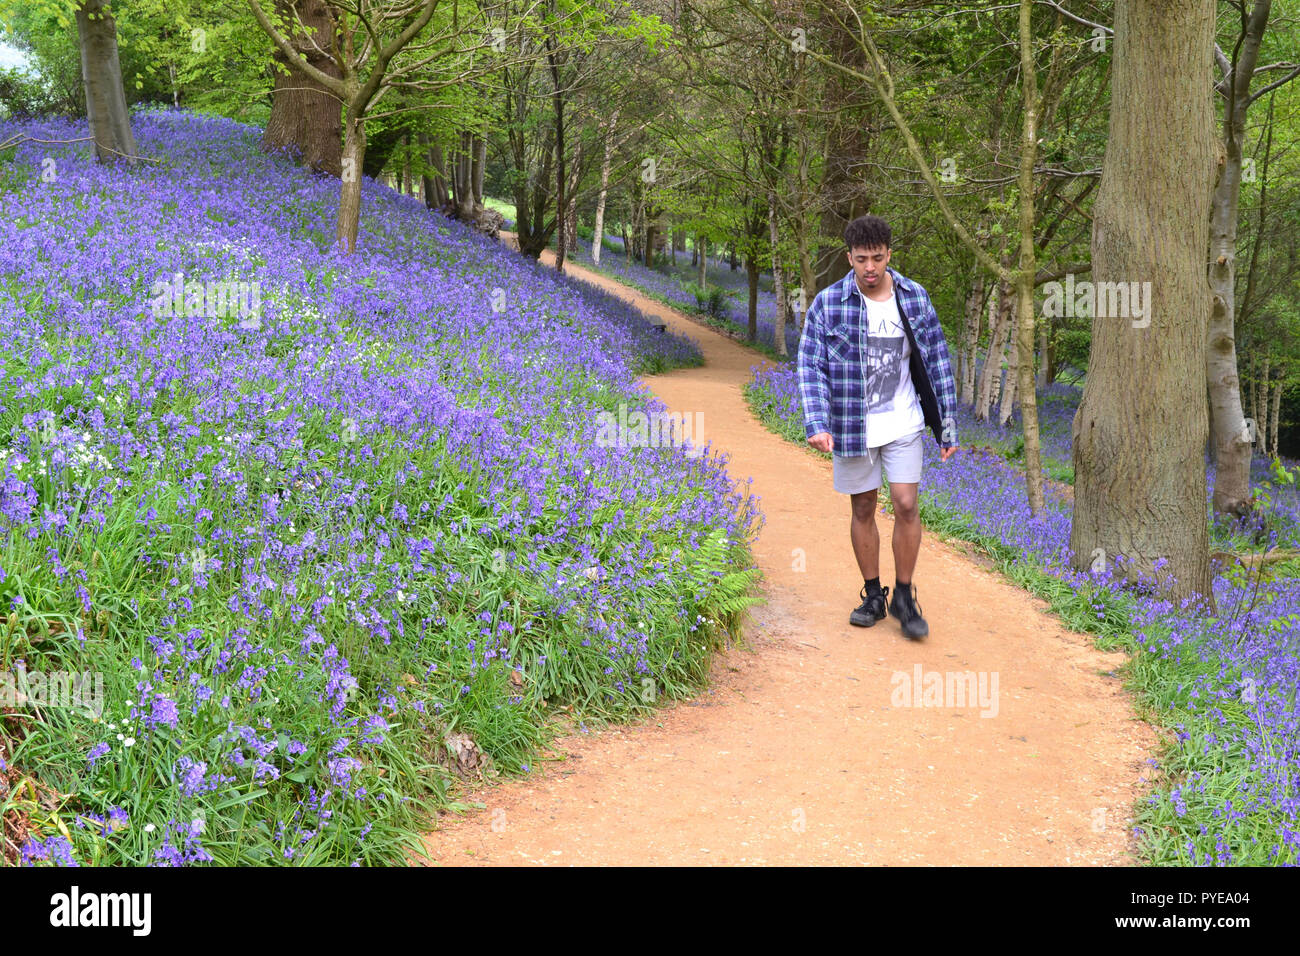 Bluebells and young man at Emmetts Garden, Ide Hill, Kent, England near Sevenoaks. The garden is renowned for bluebell displays in late April Stock Photo